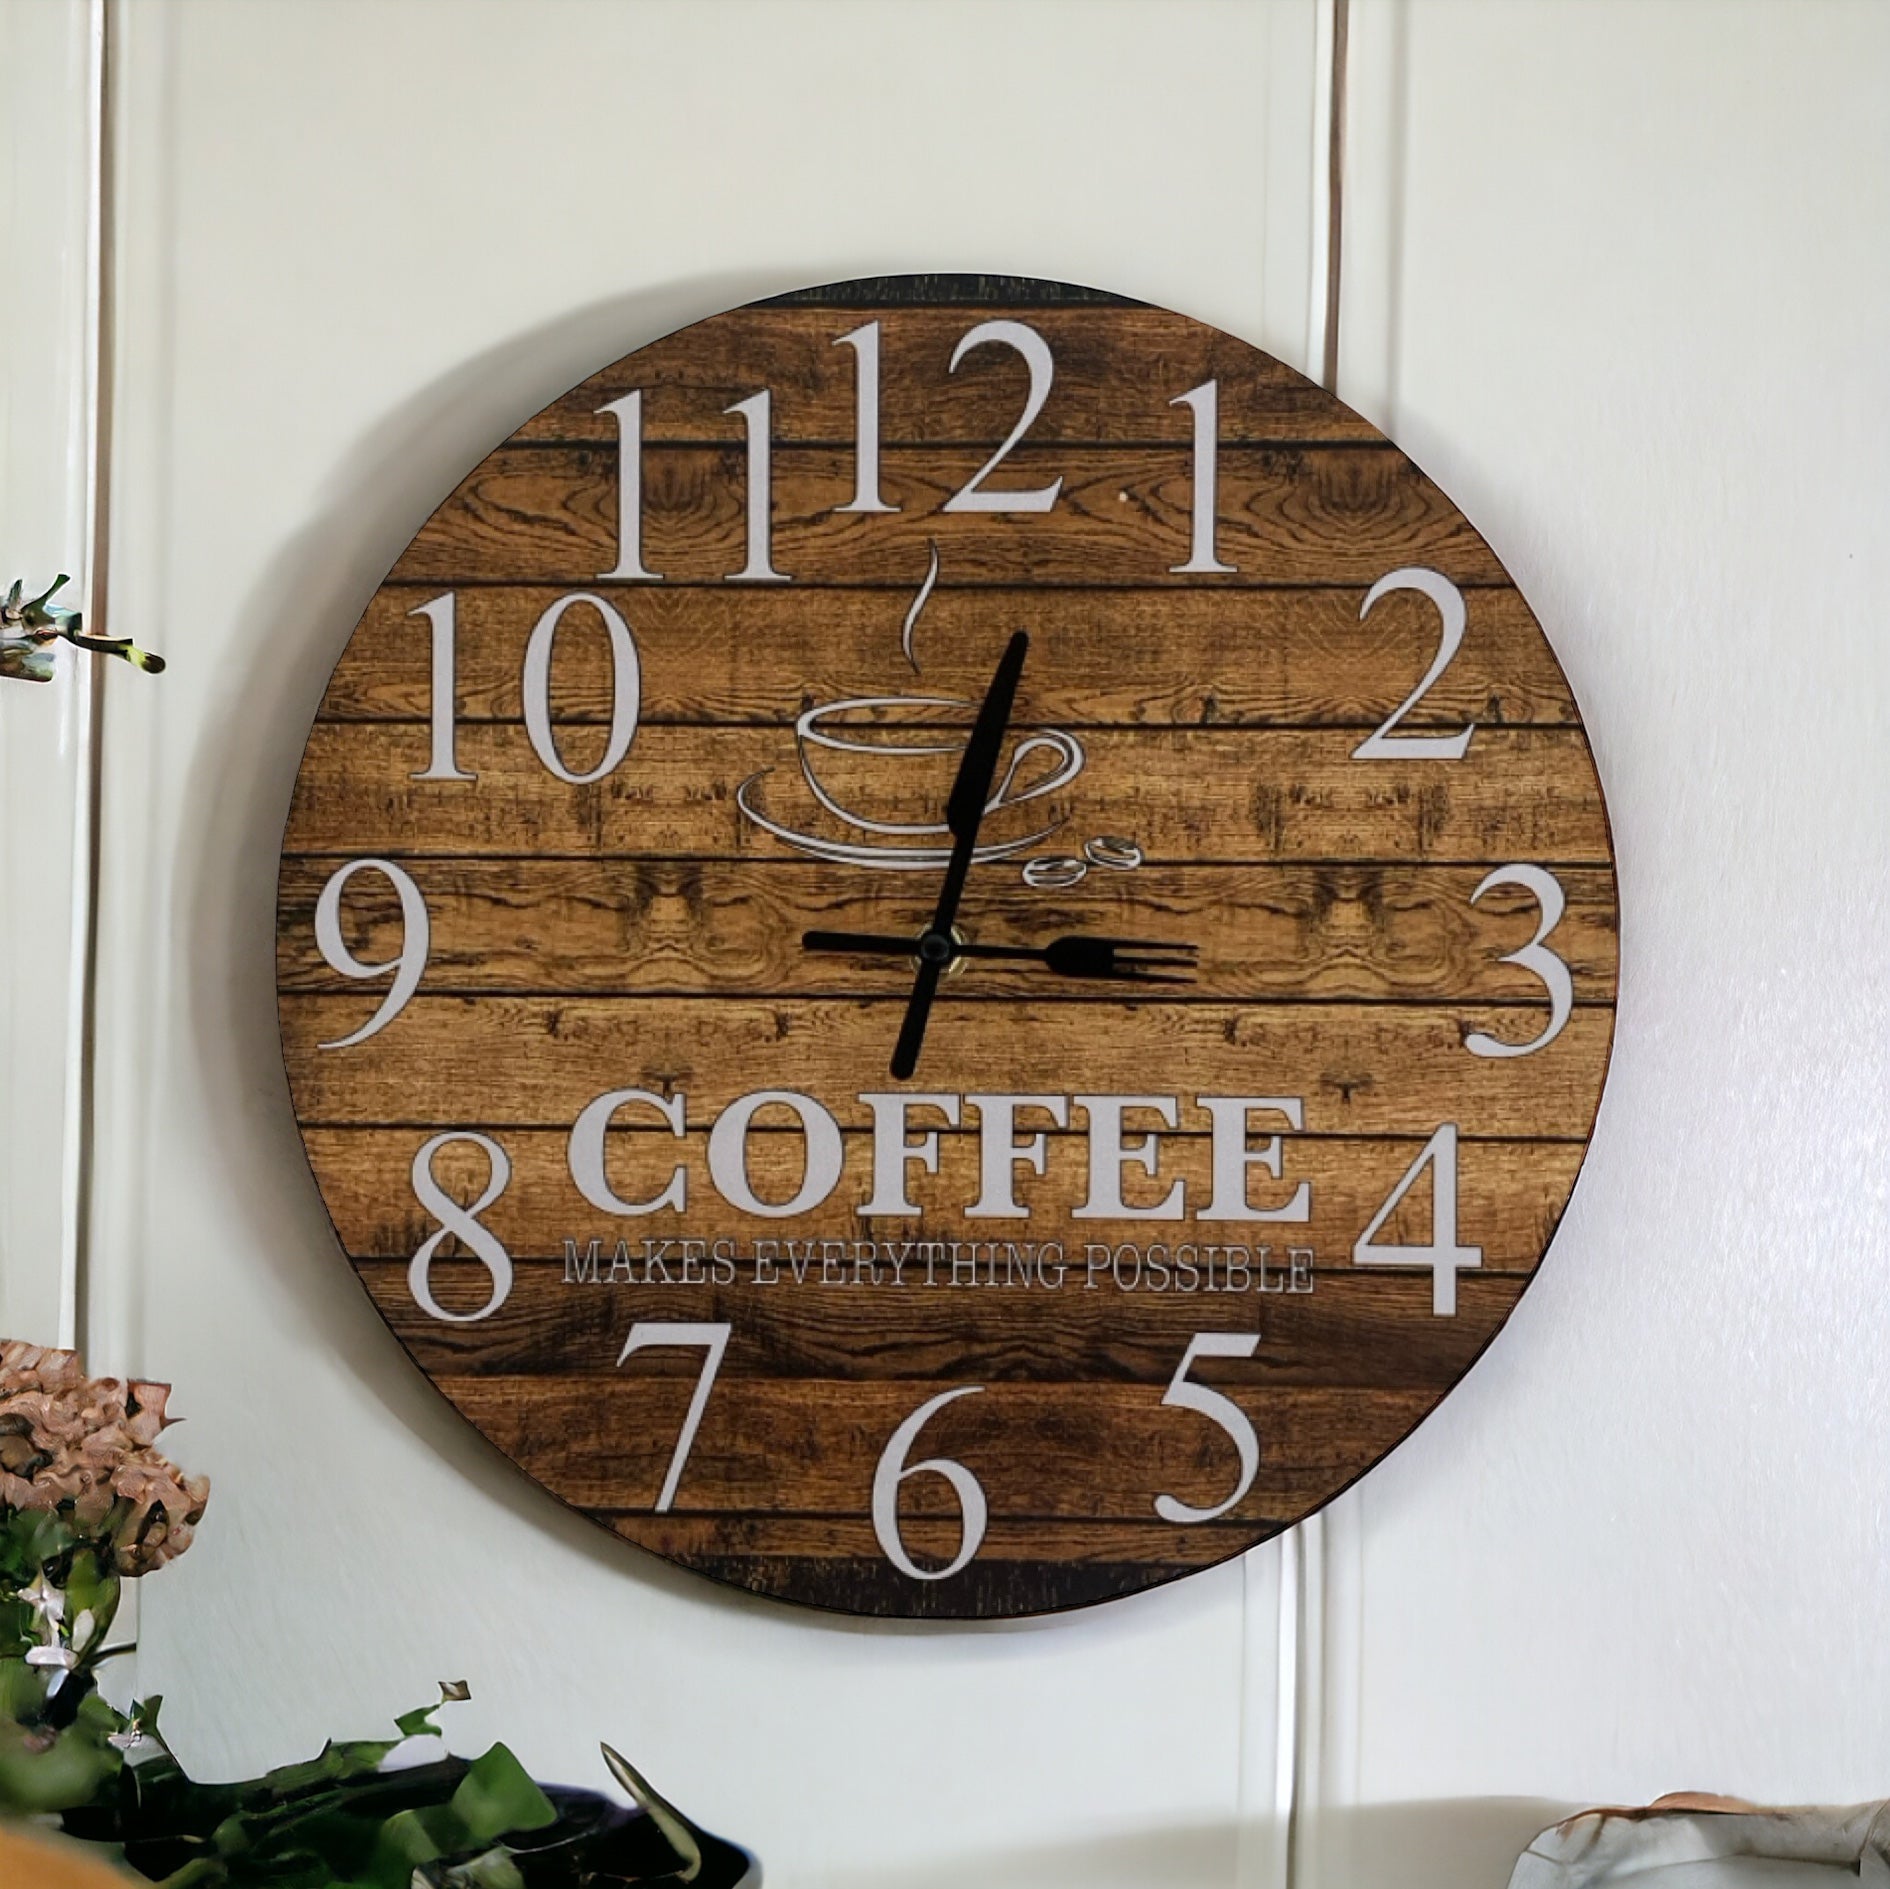 Clock Wall Rustic Wood Coffee Aussie Made - Limited Edition - The Renmy Store Homewares & Gifts 